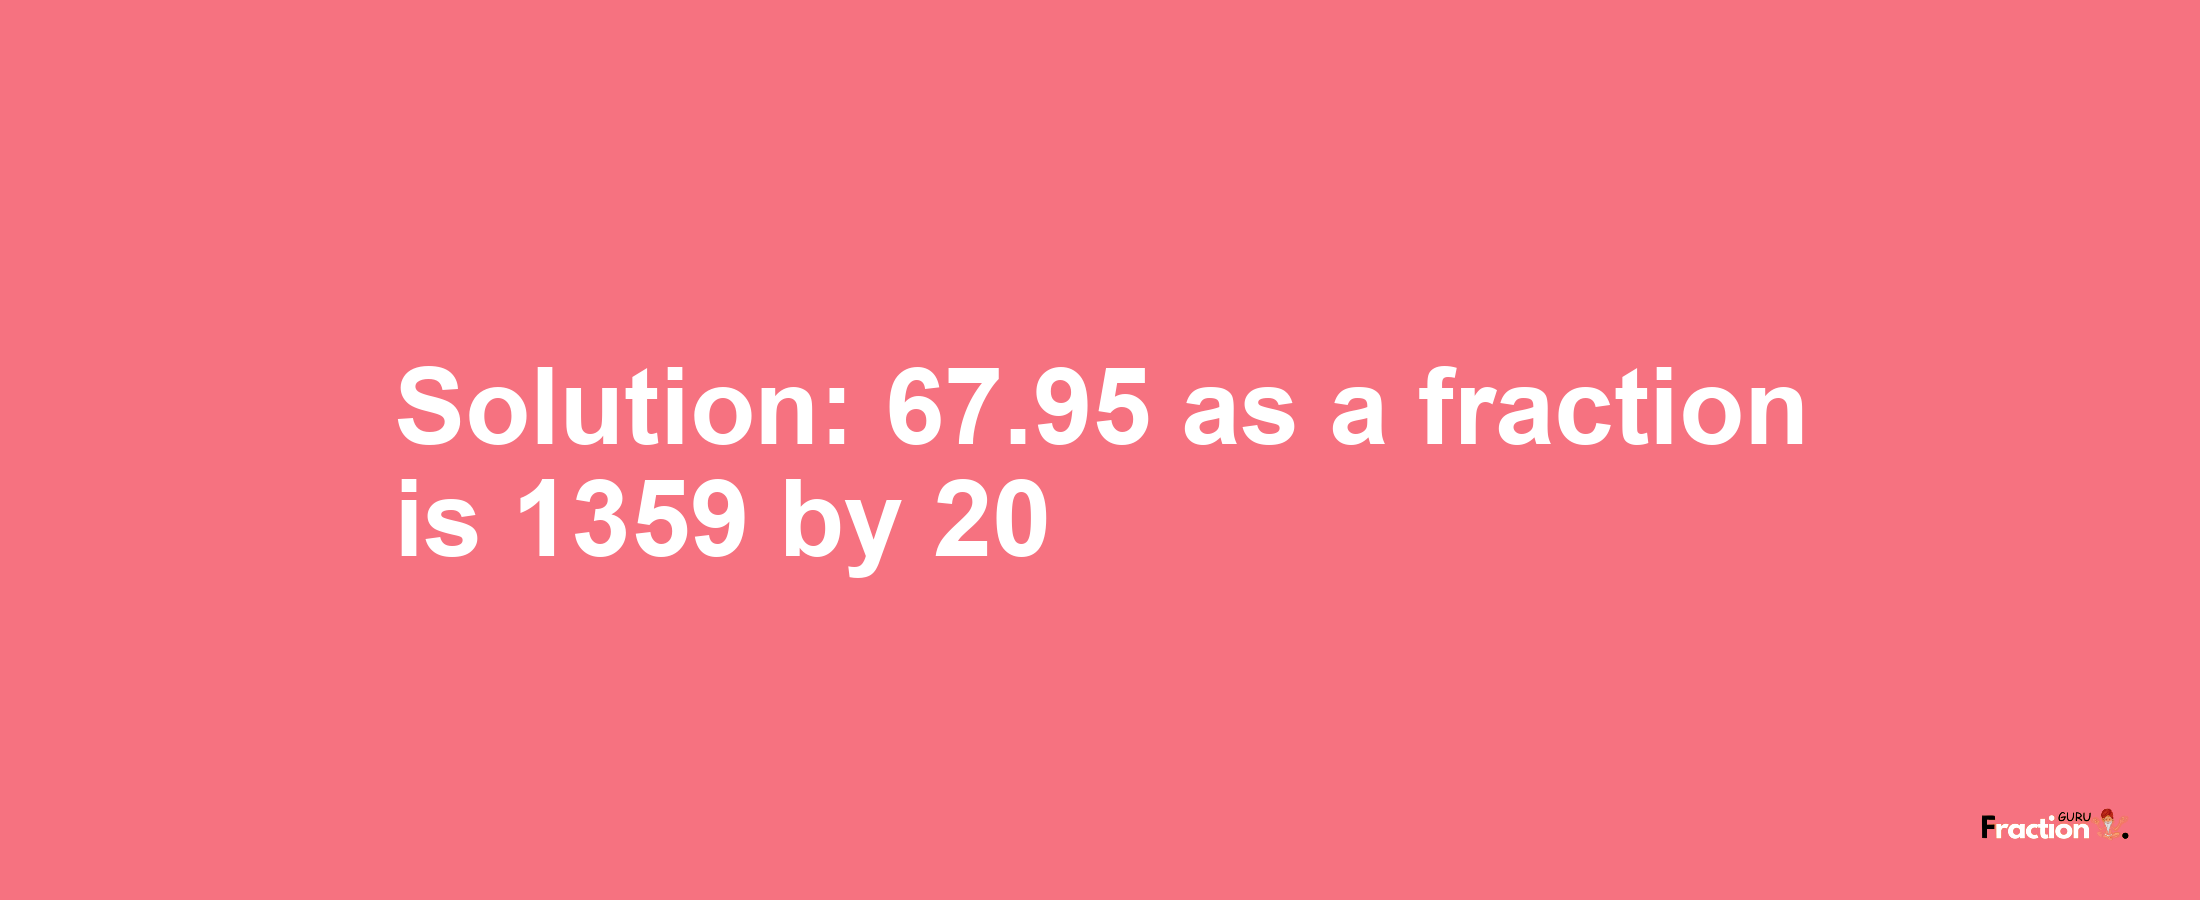 Solution:67.95 as a fraction is 1359/20